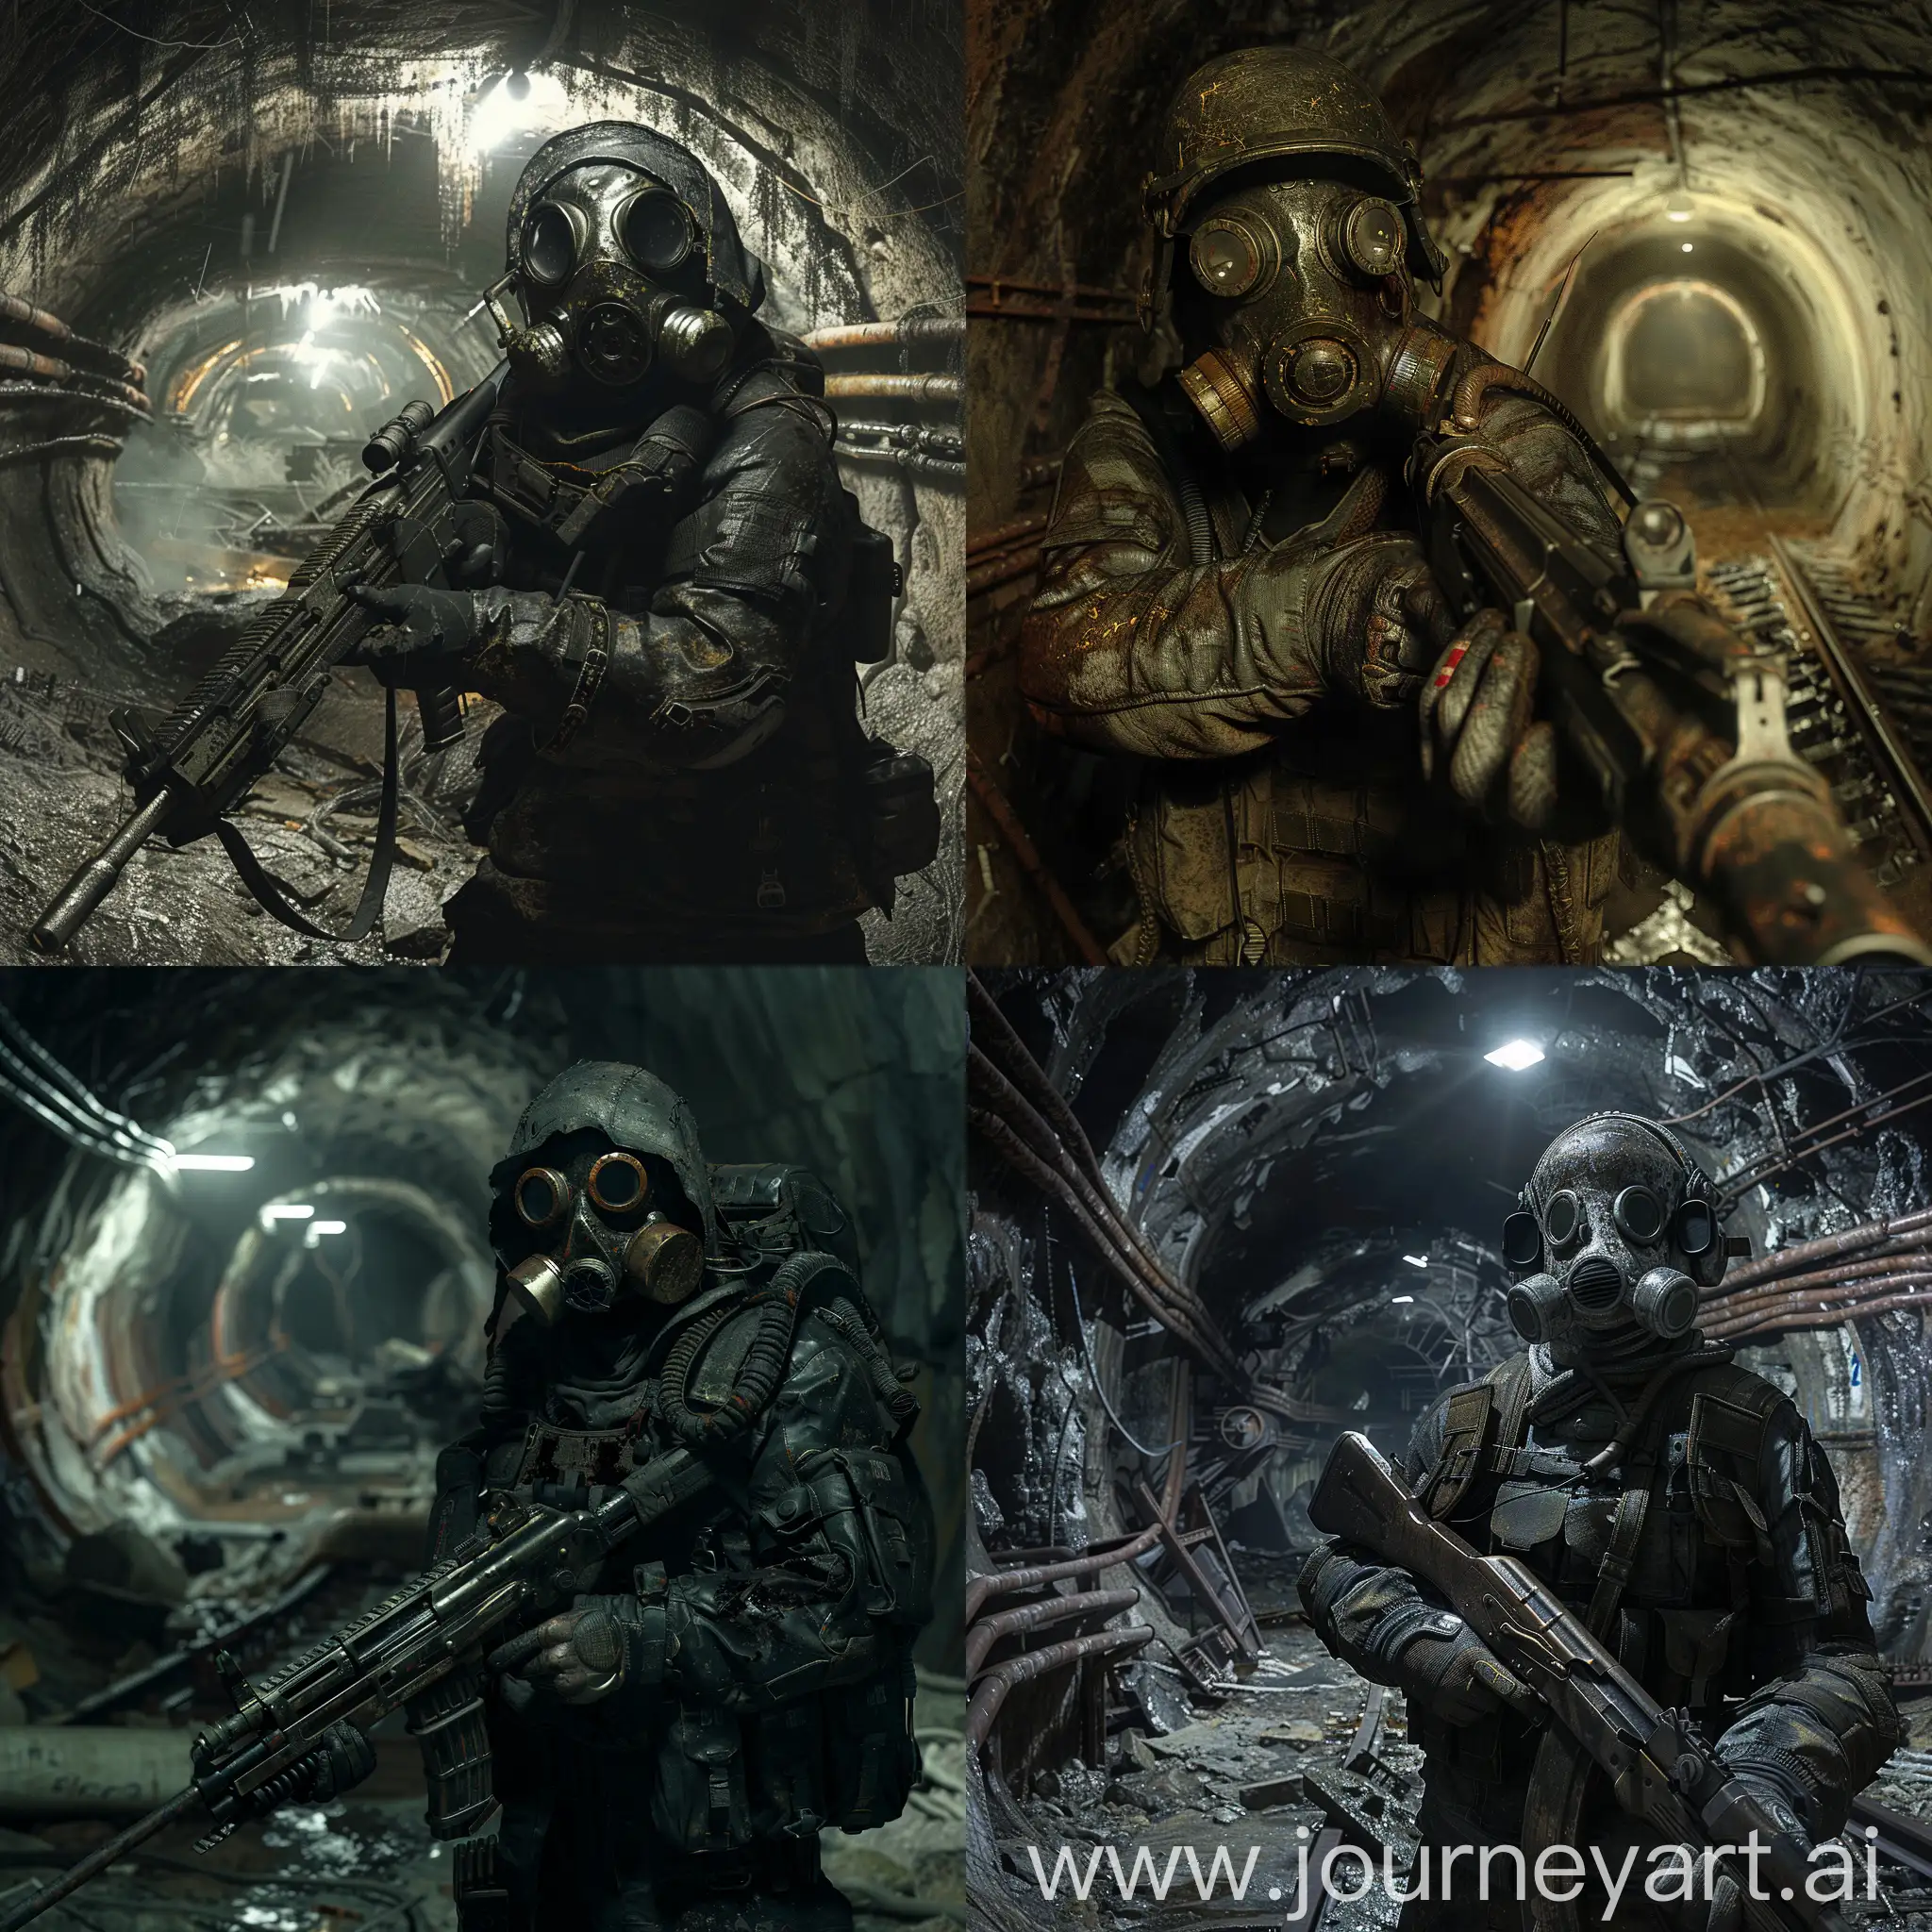 PostApocalyptic-Survivor-in-Catacombs-with-Soviet-Sniper-Rifle